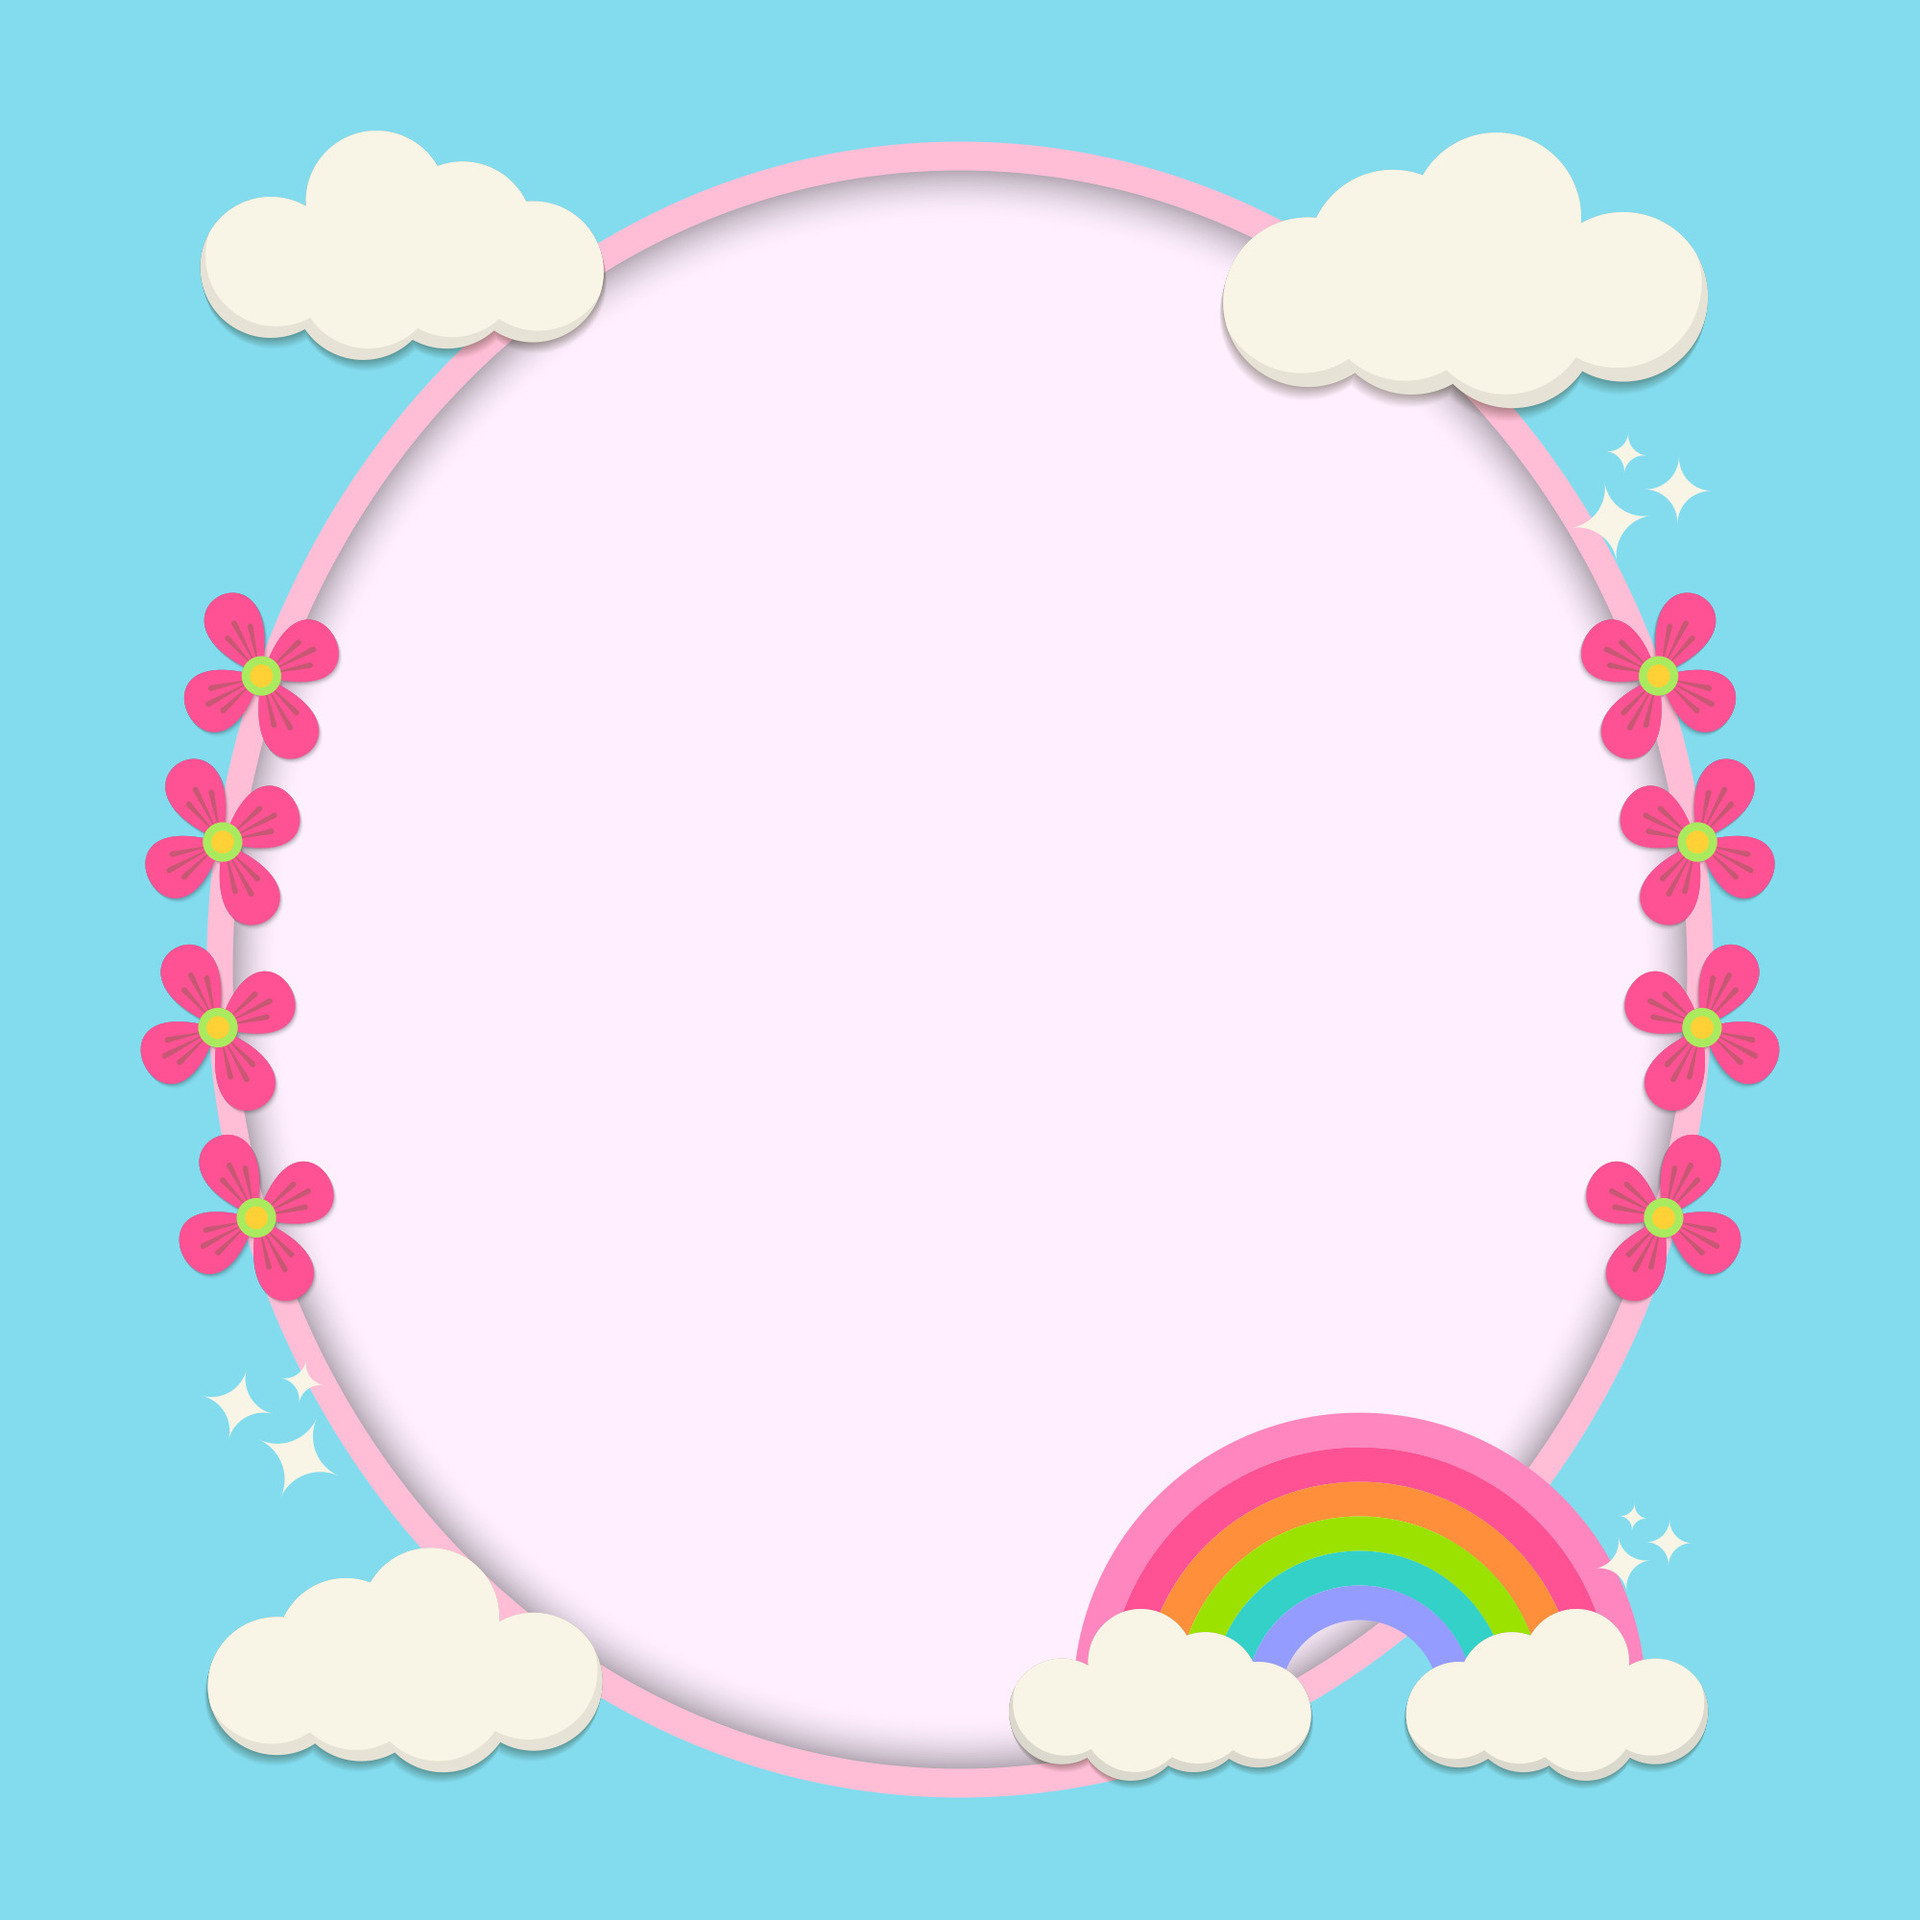 Frame decorated with clouds and rainbows and flowers 25374407 Vector ...